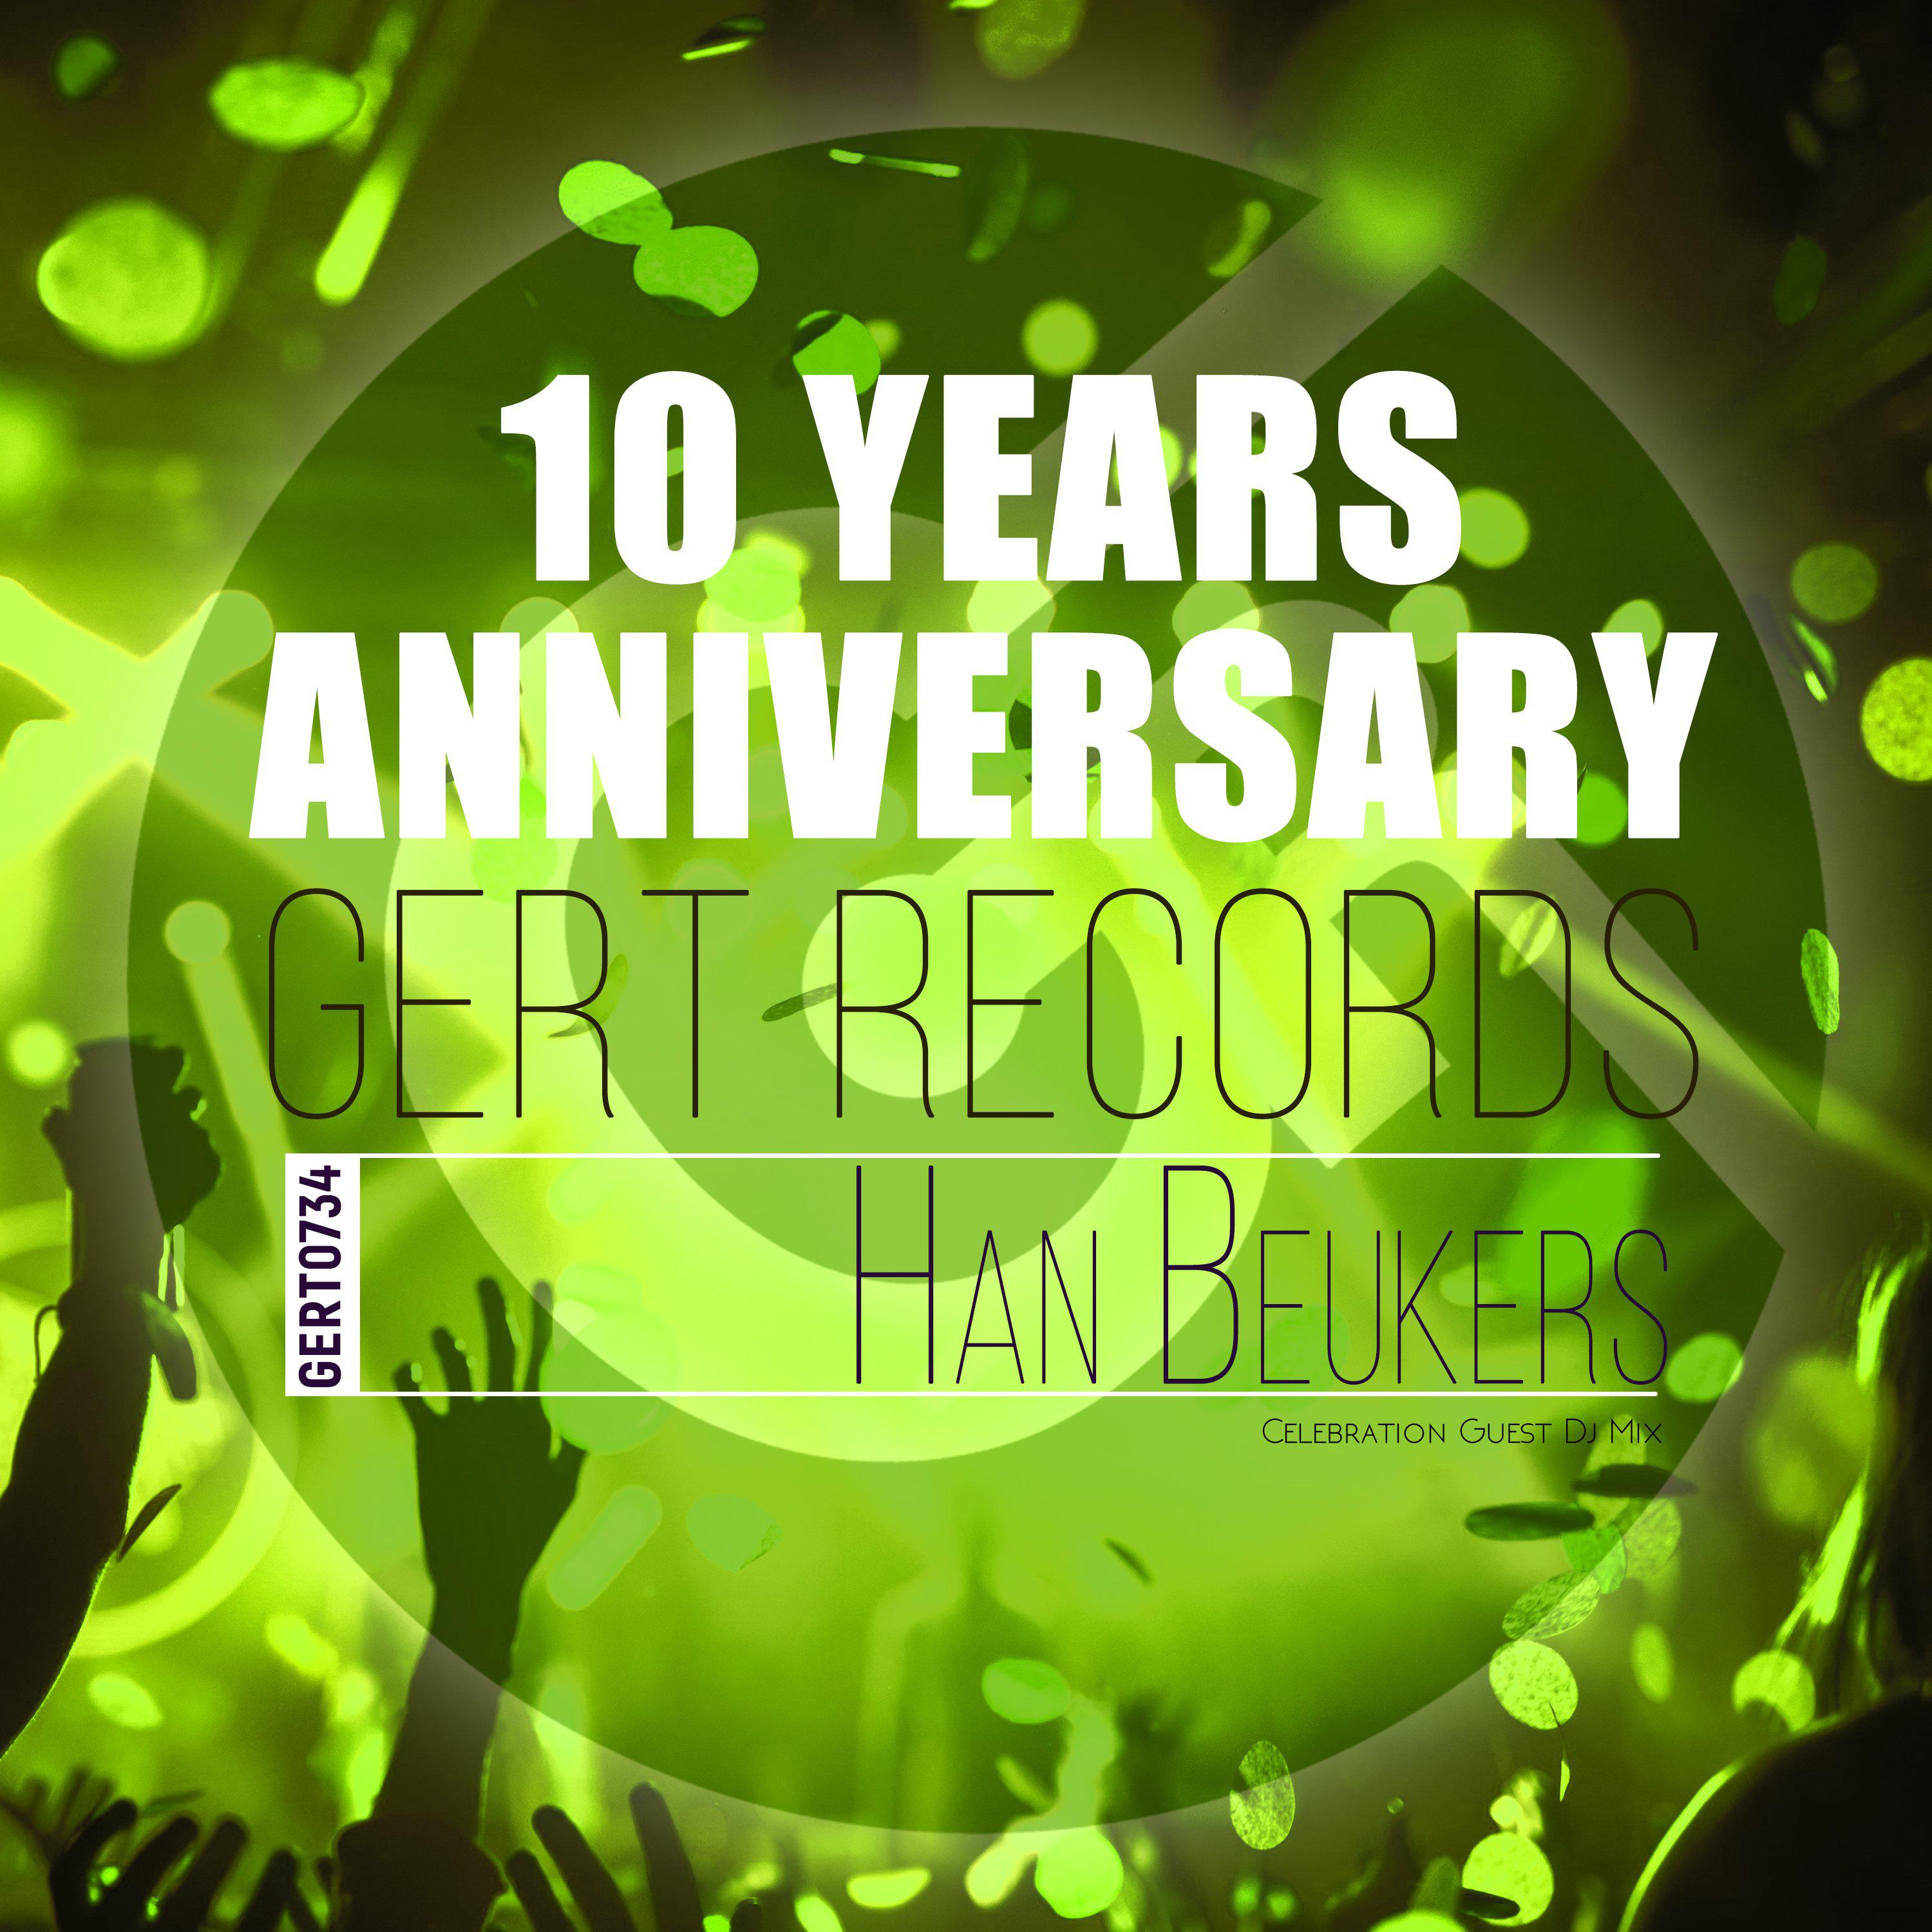 Han Beukers - Gert Records 10 Years Anniversary (Continuous DJ Mix)